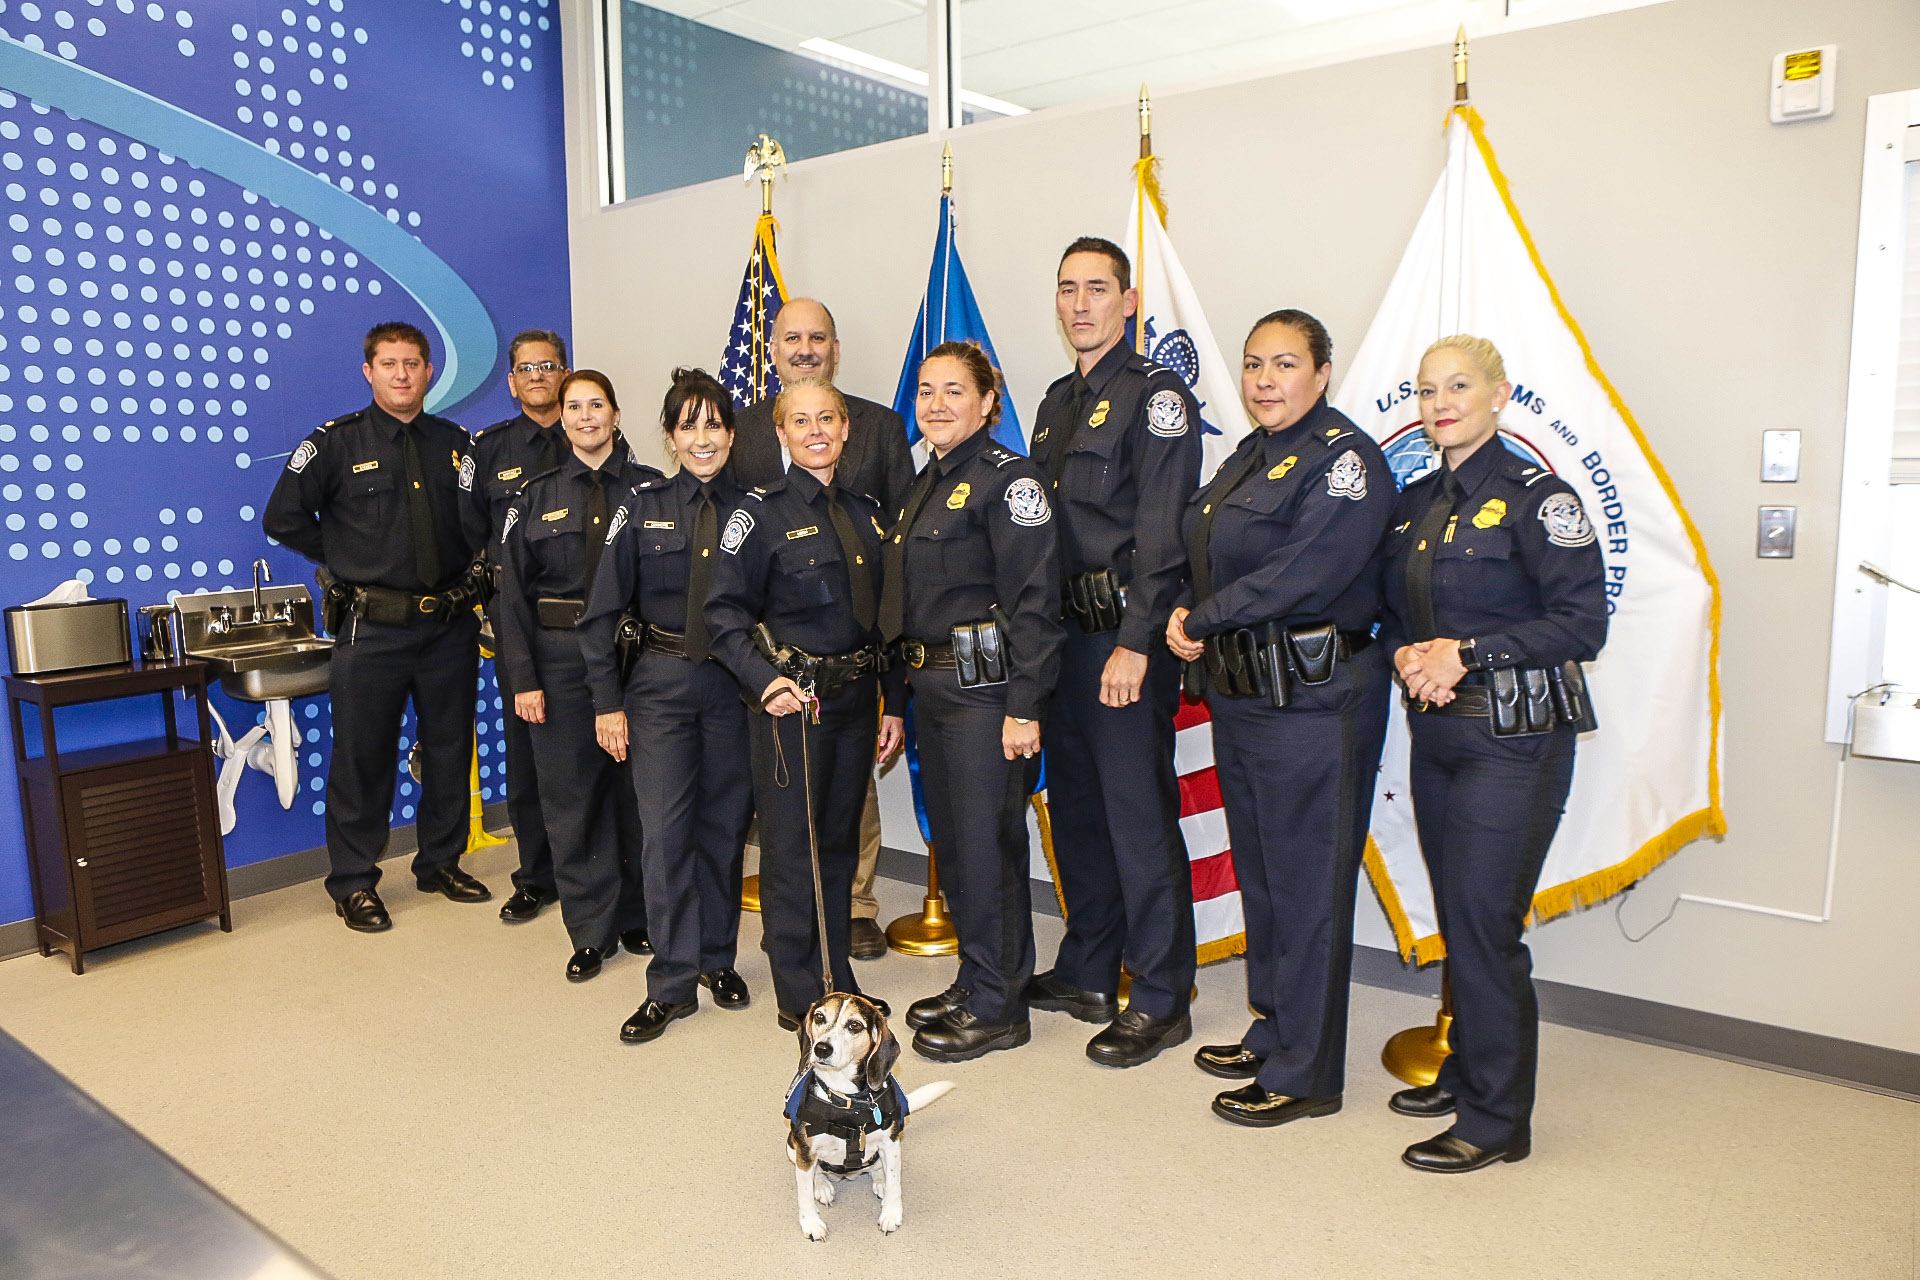 U.S. Customs team, and beagle, at grand opening ceremonies at BRAA U.S Customs & Border Protection Service office